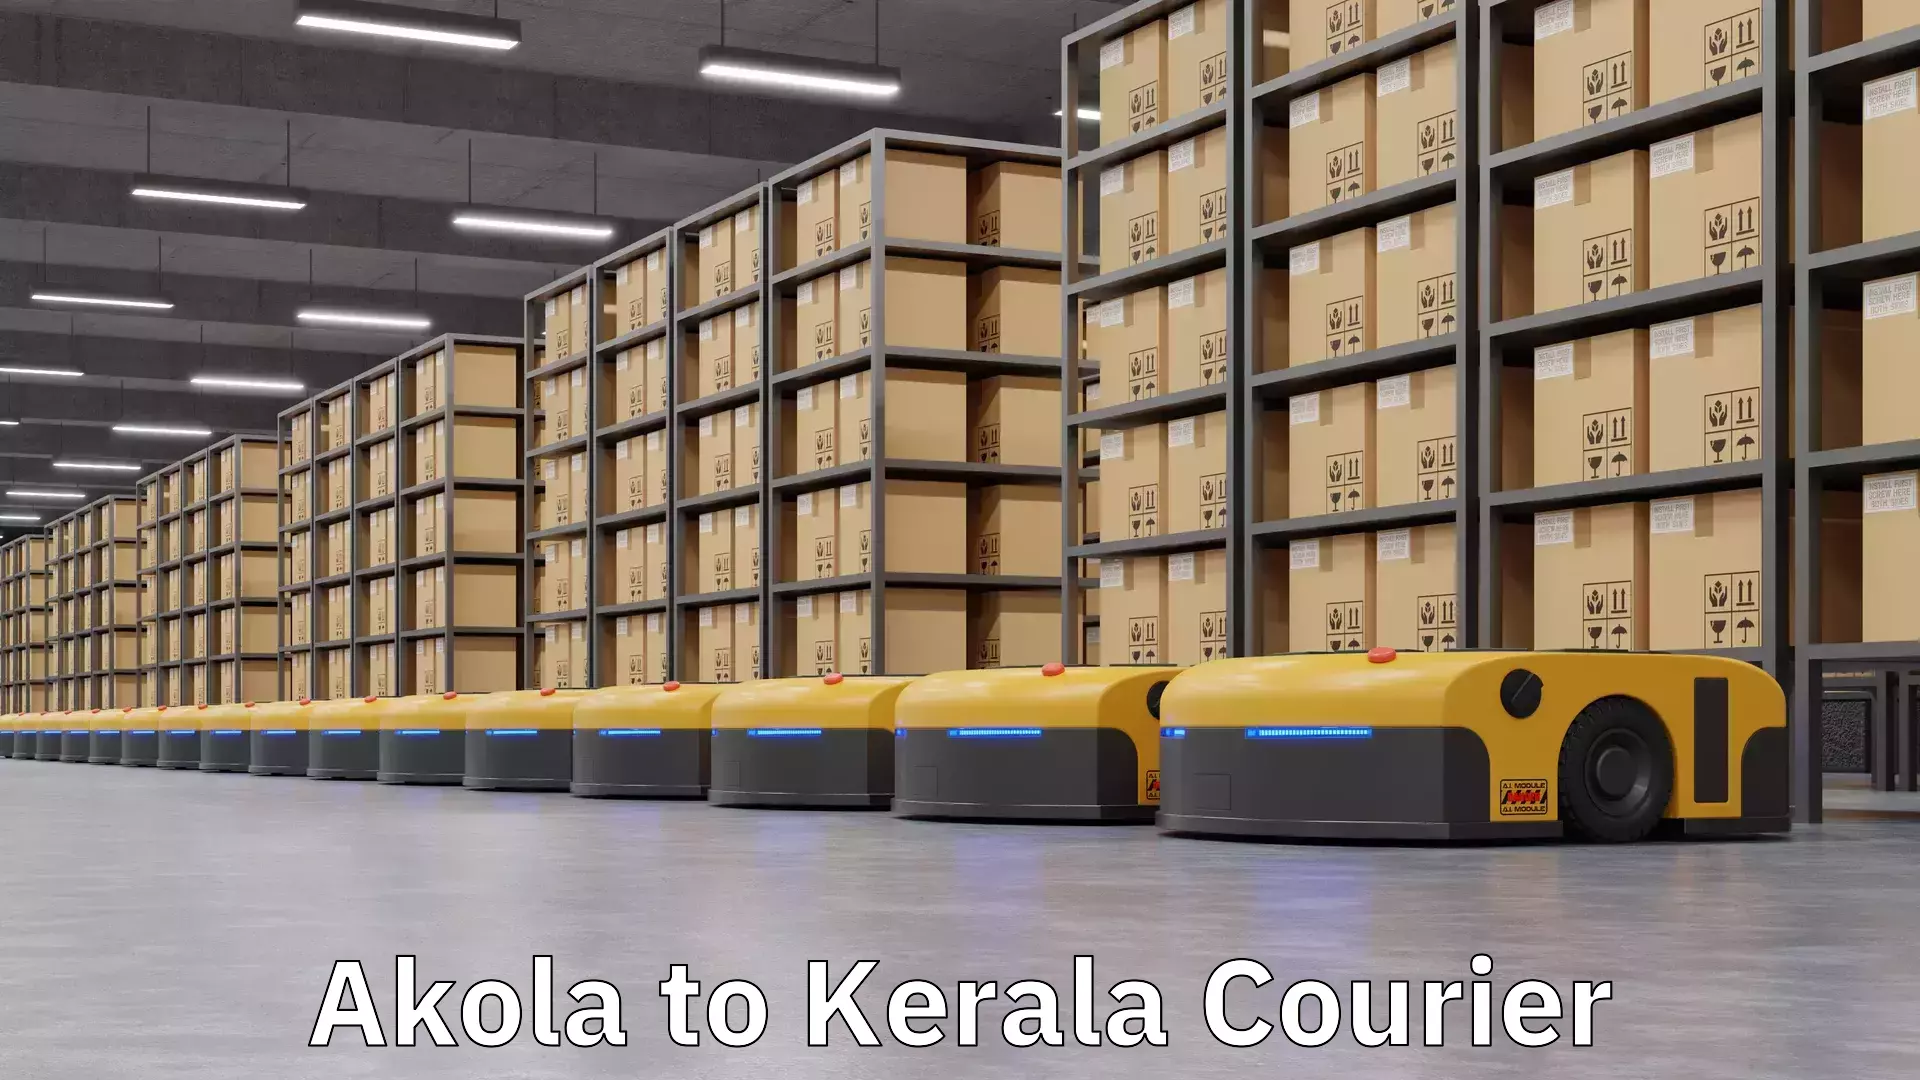 Package delivery network Akola to Kerala